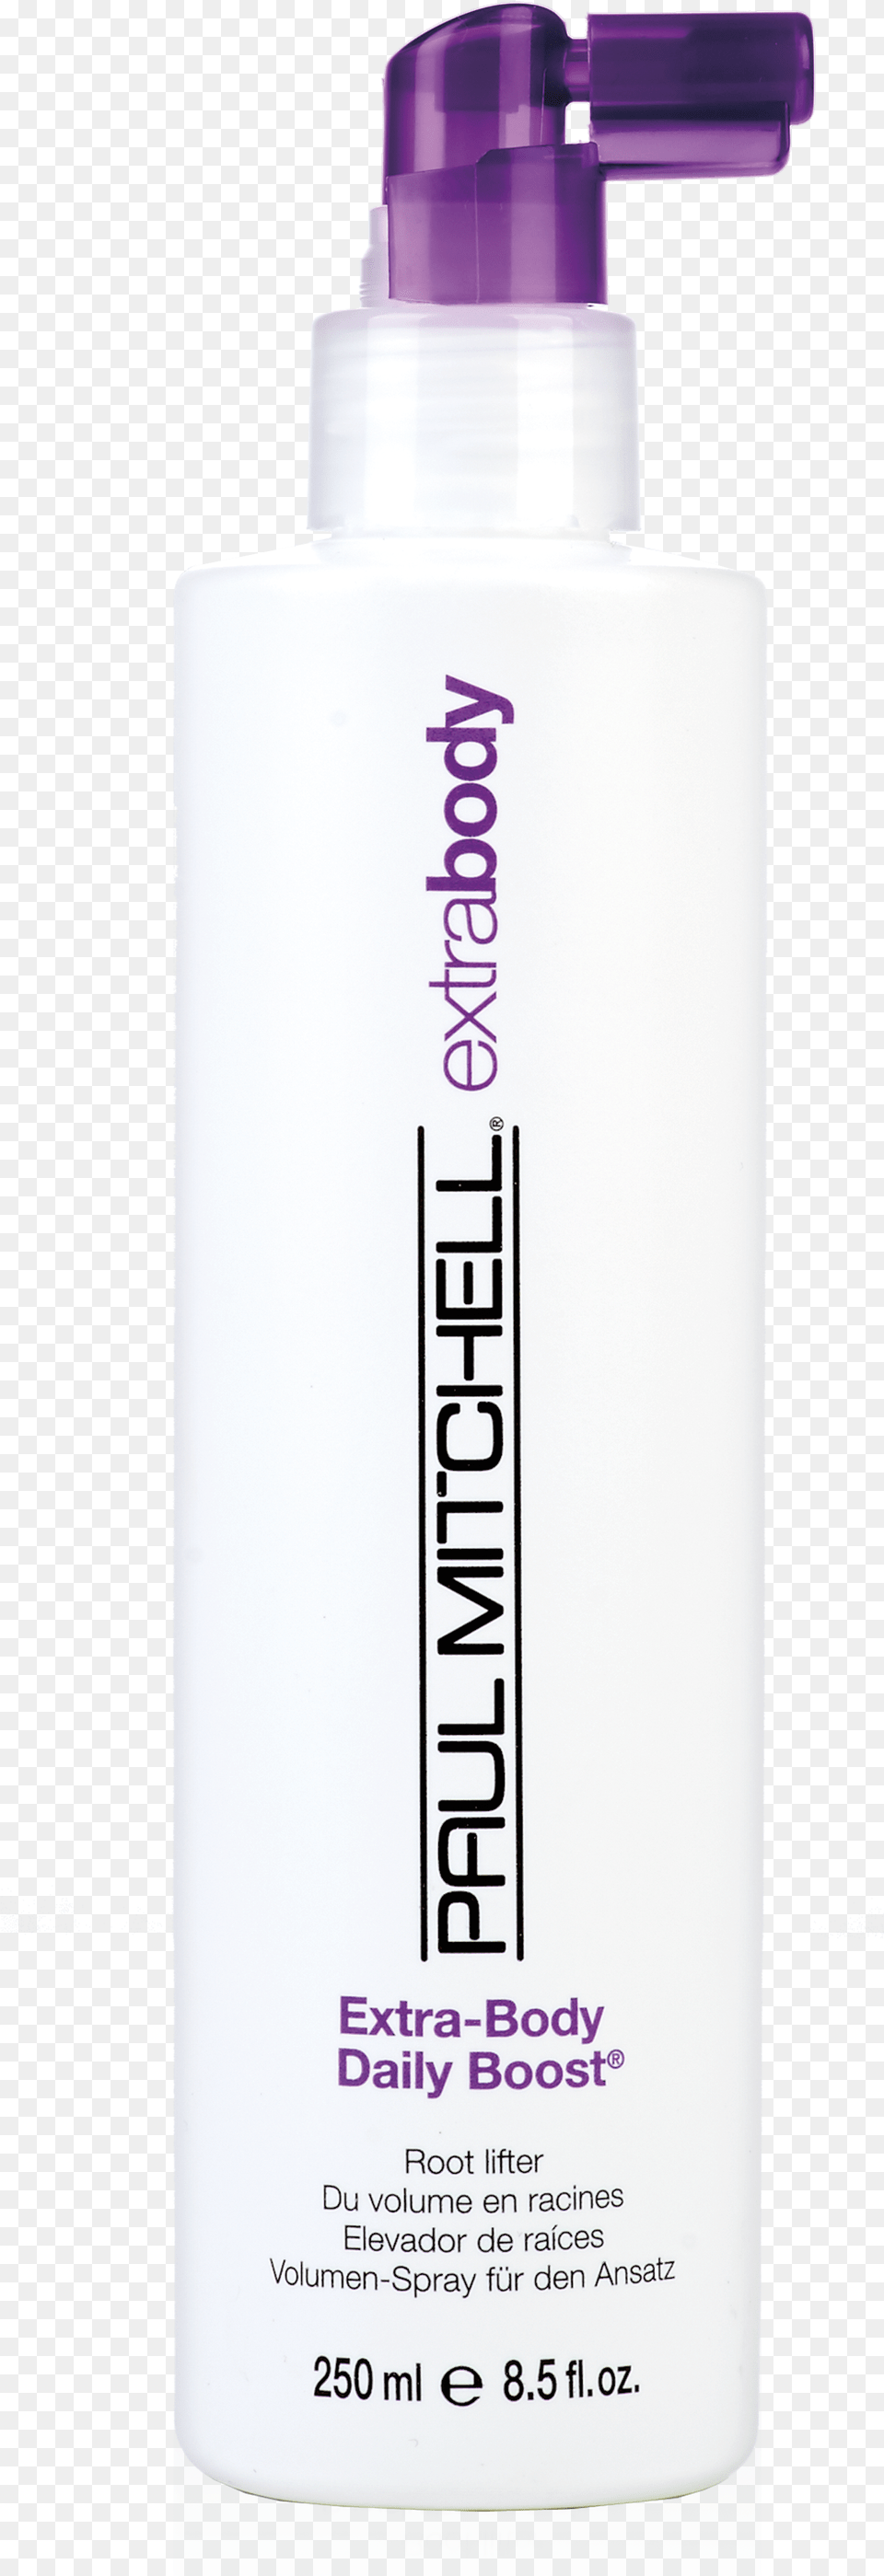 Paul Mitchell Extra Body Daily Boost 85 Fl Oz, Bottle, Lotion, Shaker, Cosmetics Png Image